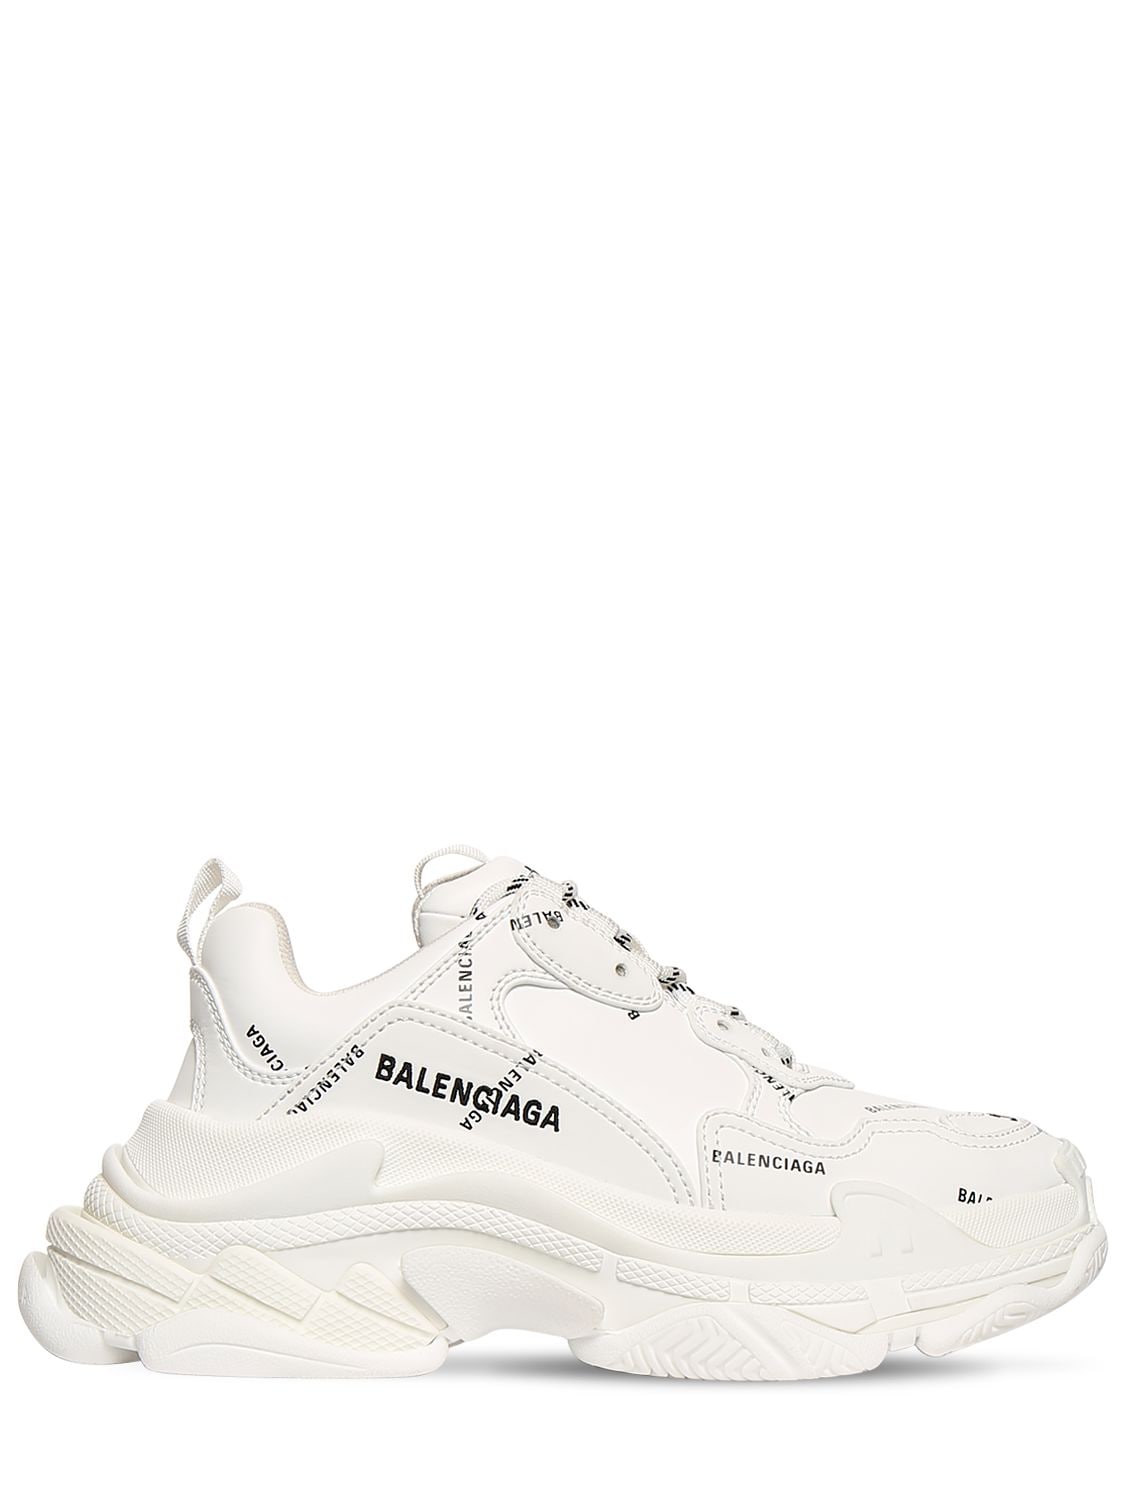 Balenciaga Leather triple S Sneakers in Navy Blue Blue Lyst